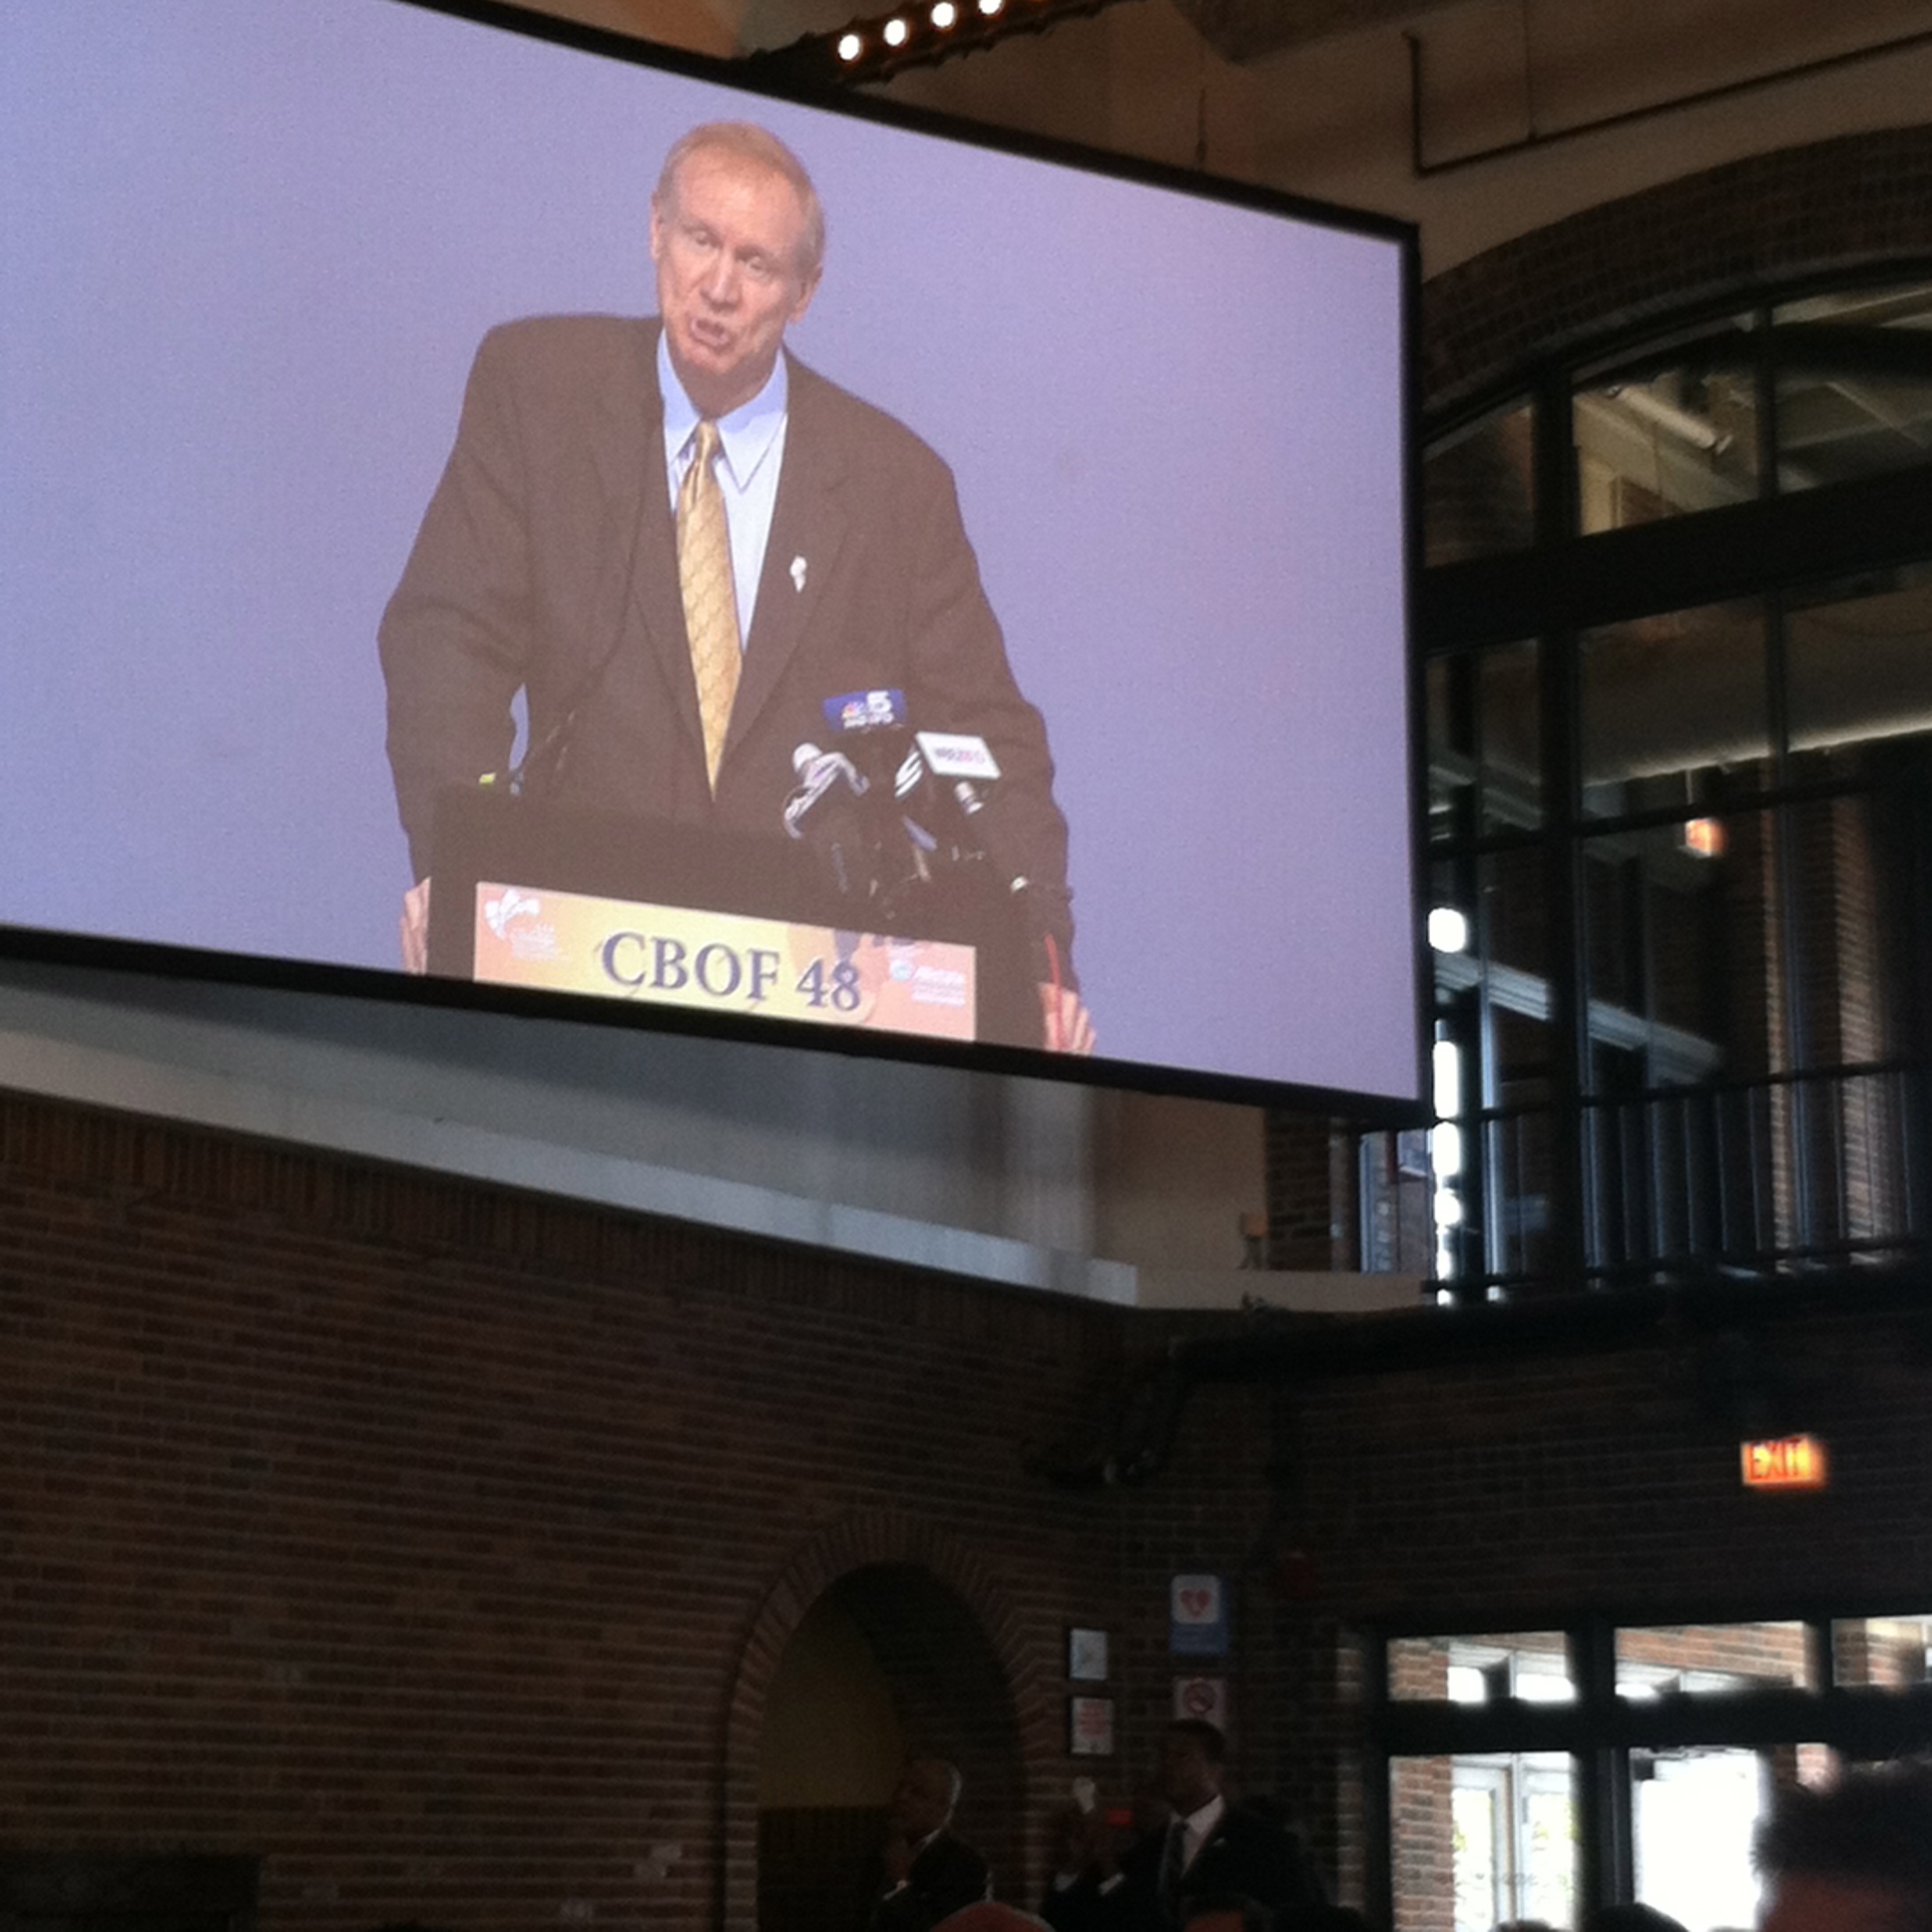 Newly elect  Governor Rauner gives brief remarks at CBOF 48, Chicago Navy Pier